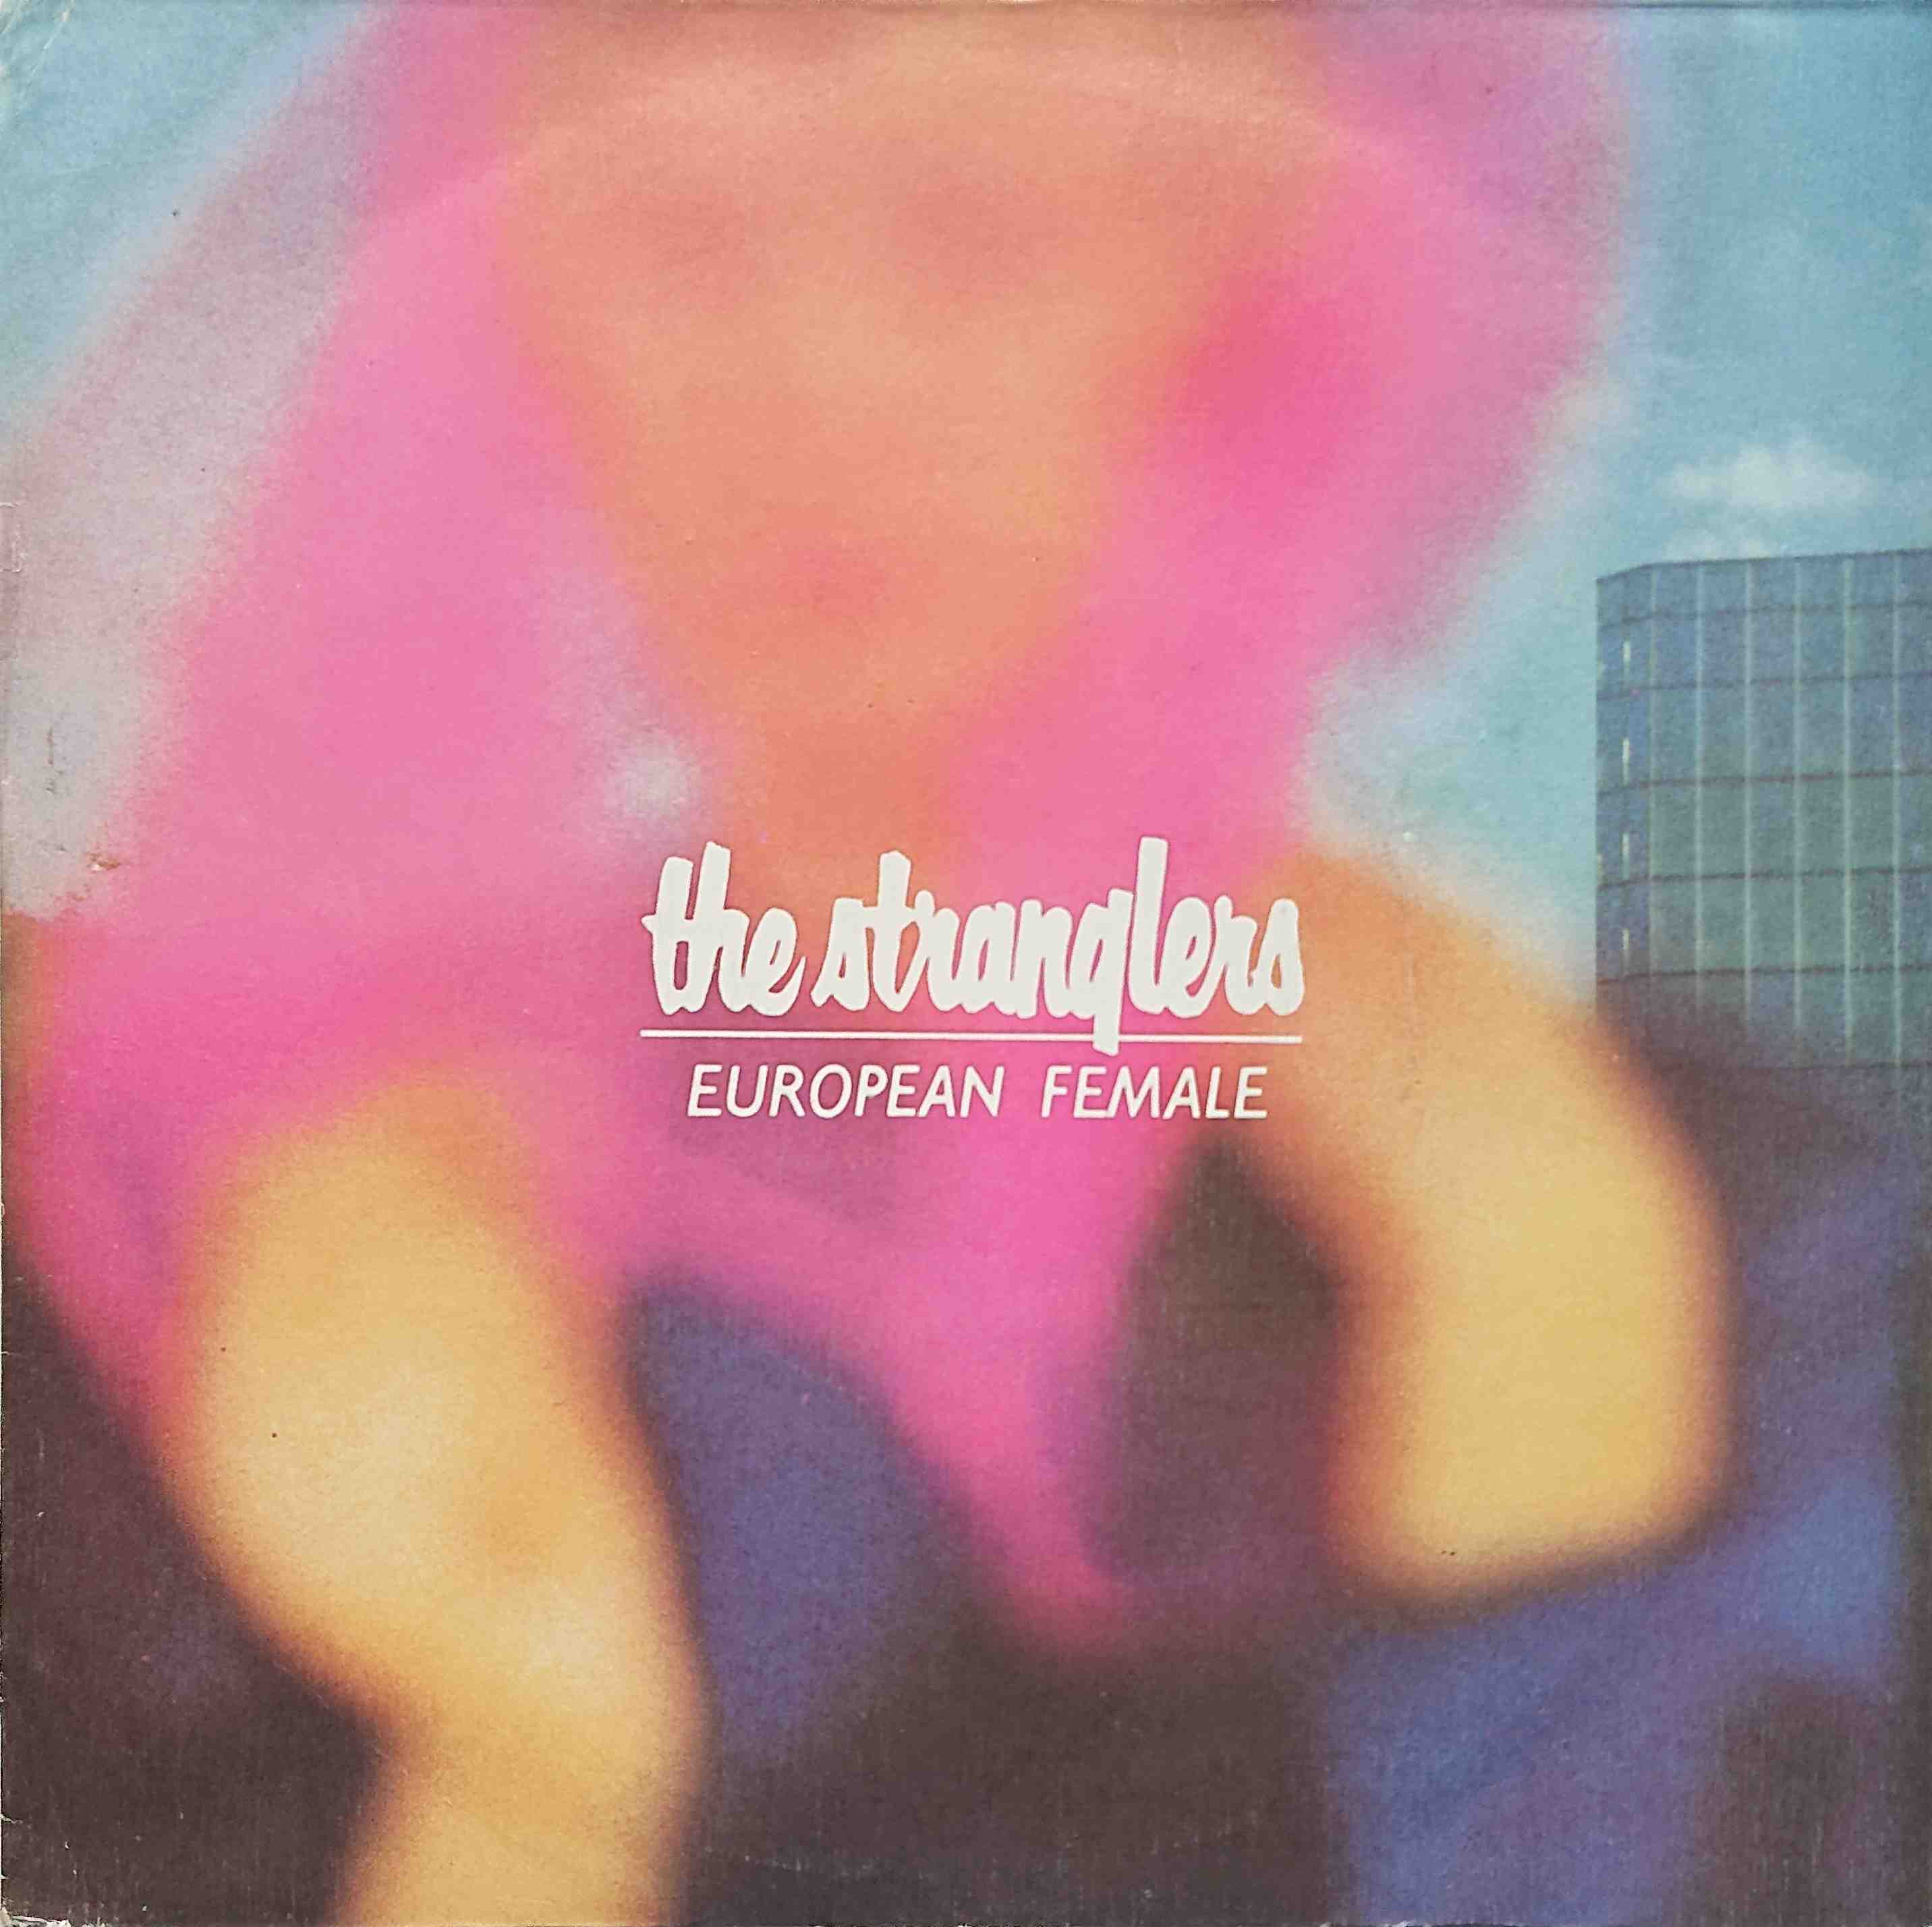 Picture of European female by artist The Stranglers from The Stranglers singles